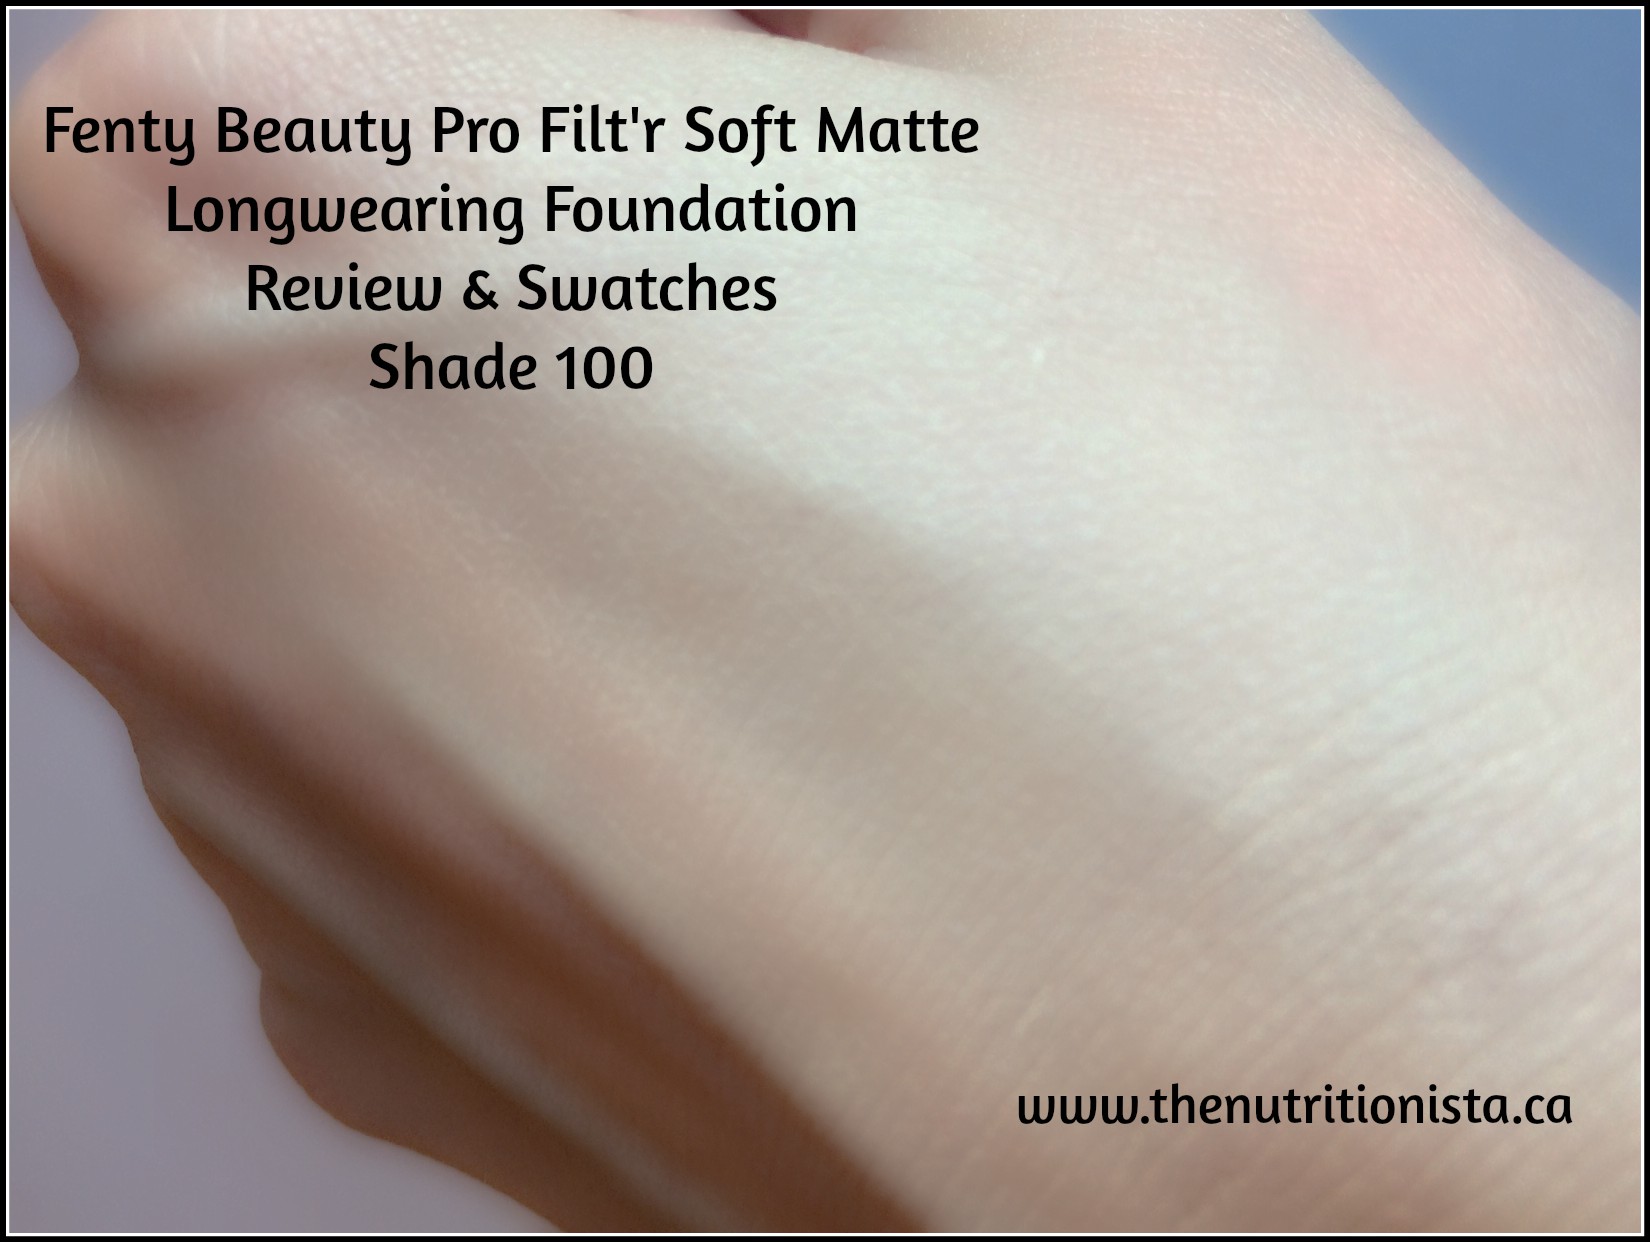 Fenty Pro Filt'r Soft Matte Foundation review and shade 100 swatches | via @bcnutritionista